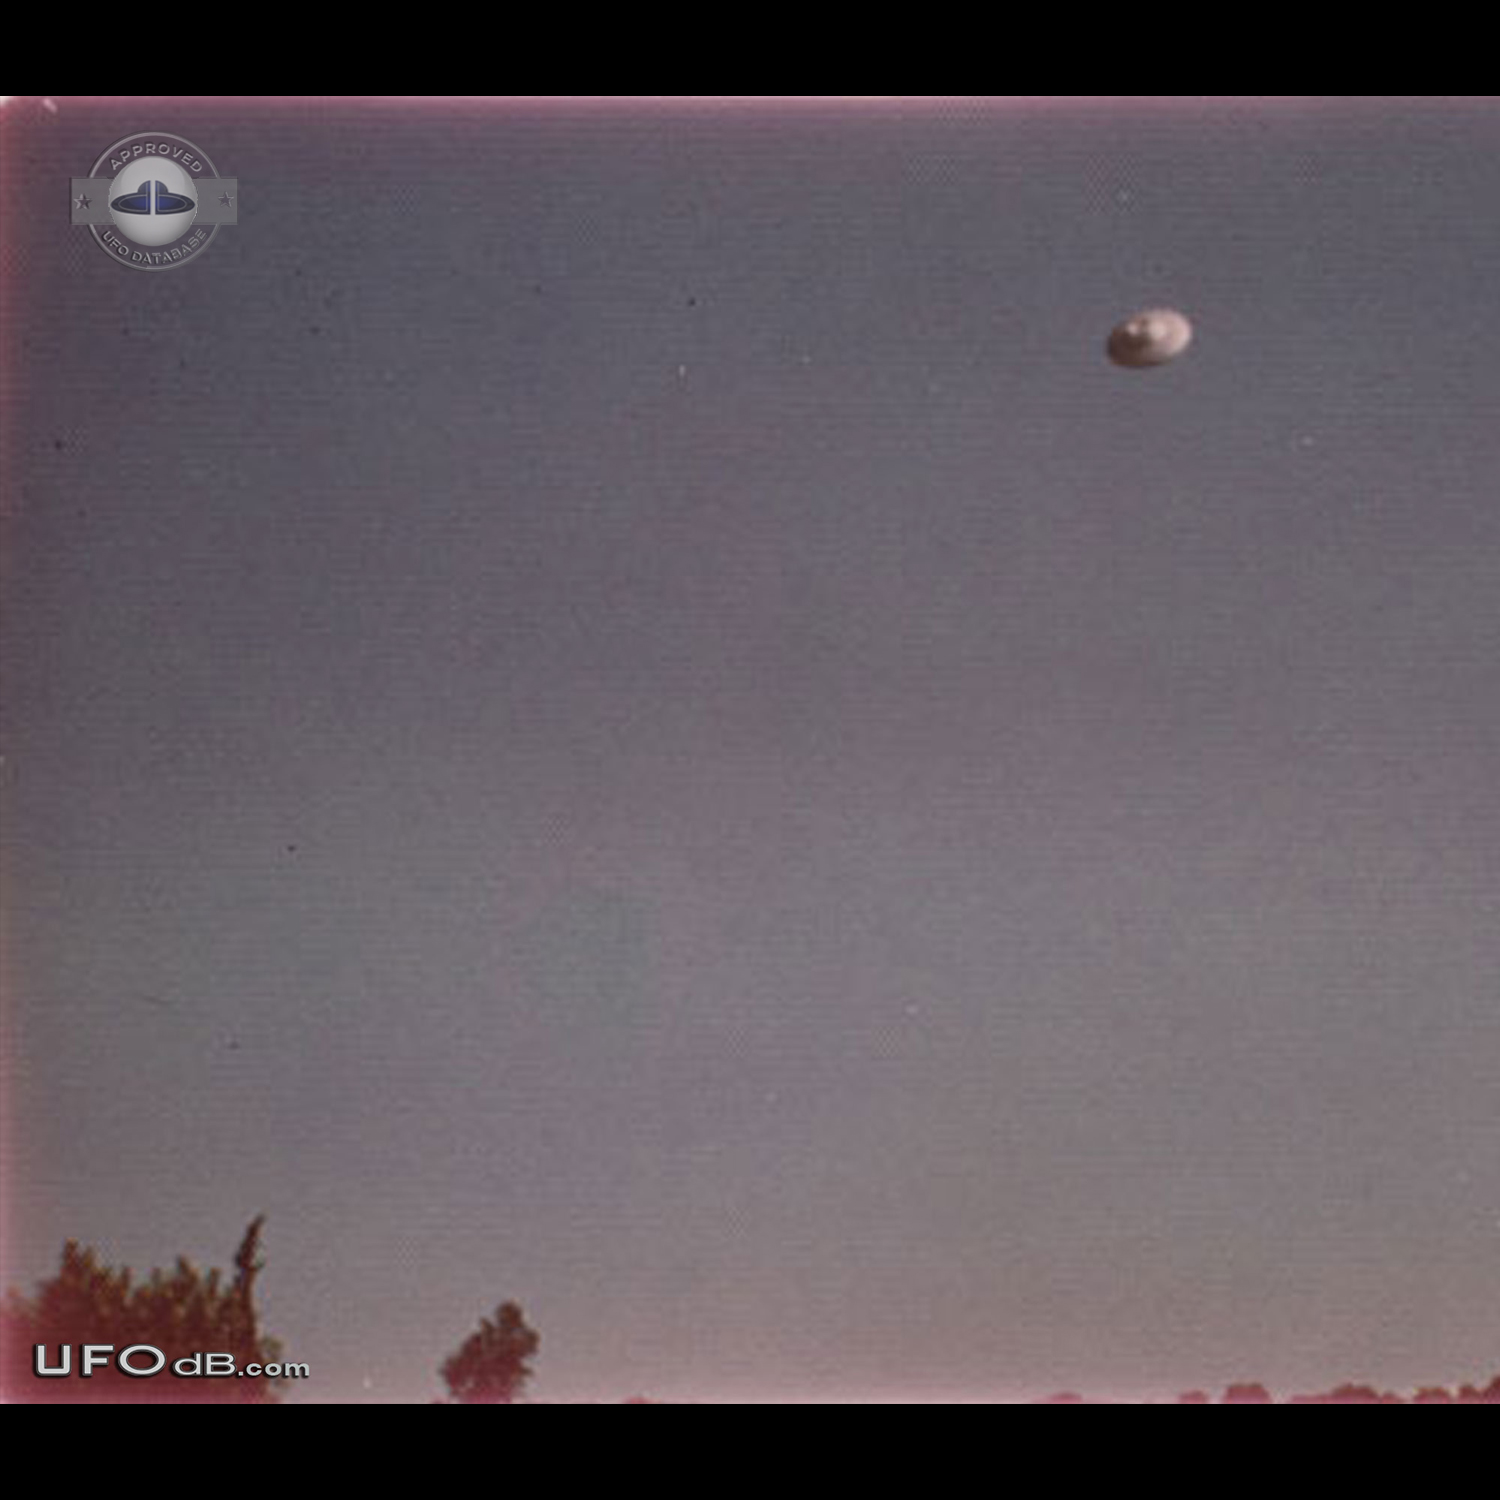 Famous Florida Uruguay UFO pictures sequence taken July 1977 UFO Picture #463-1